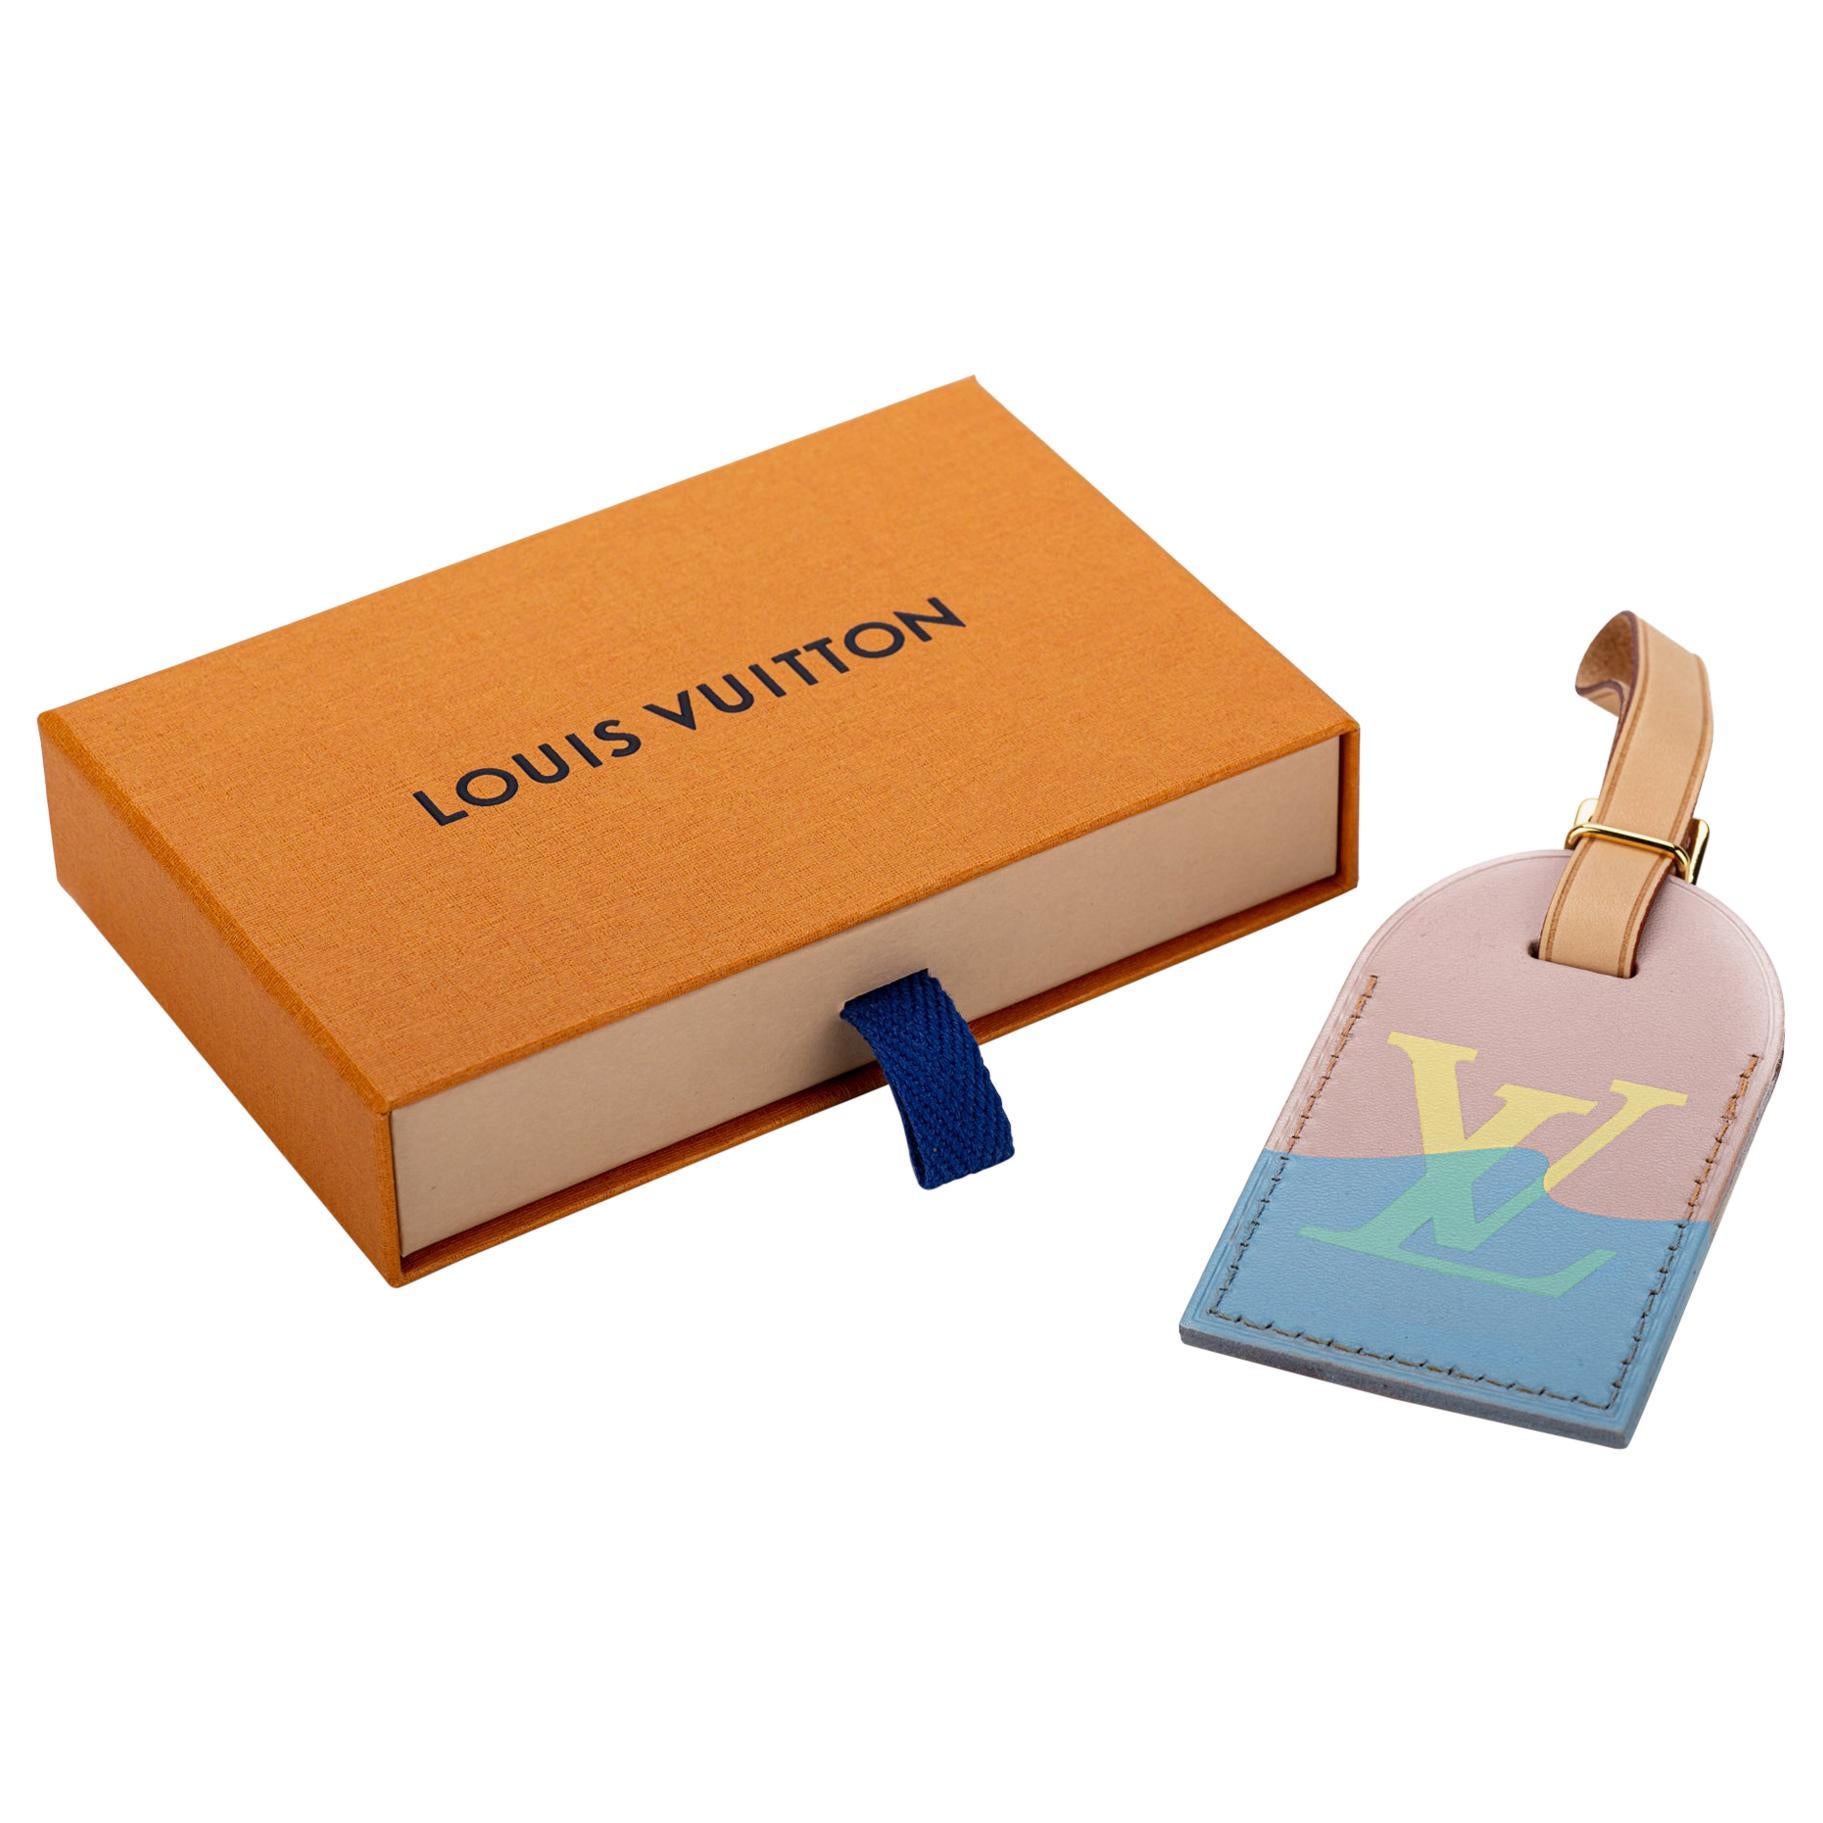 New in Box Louis Vuitton Limited Edition Luggage Name Tag Saint Tropez For Sale